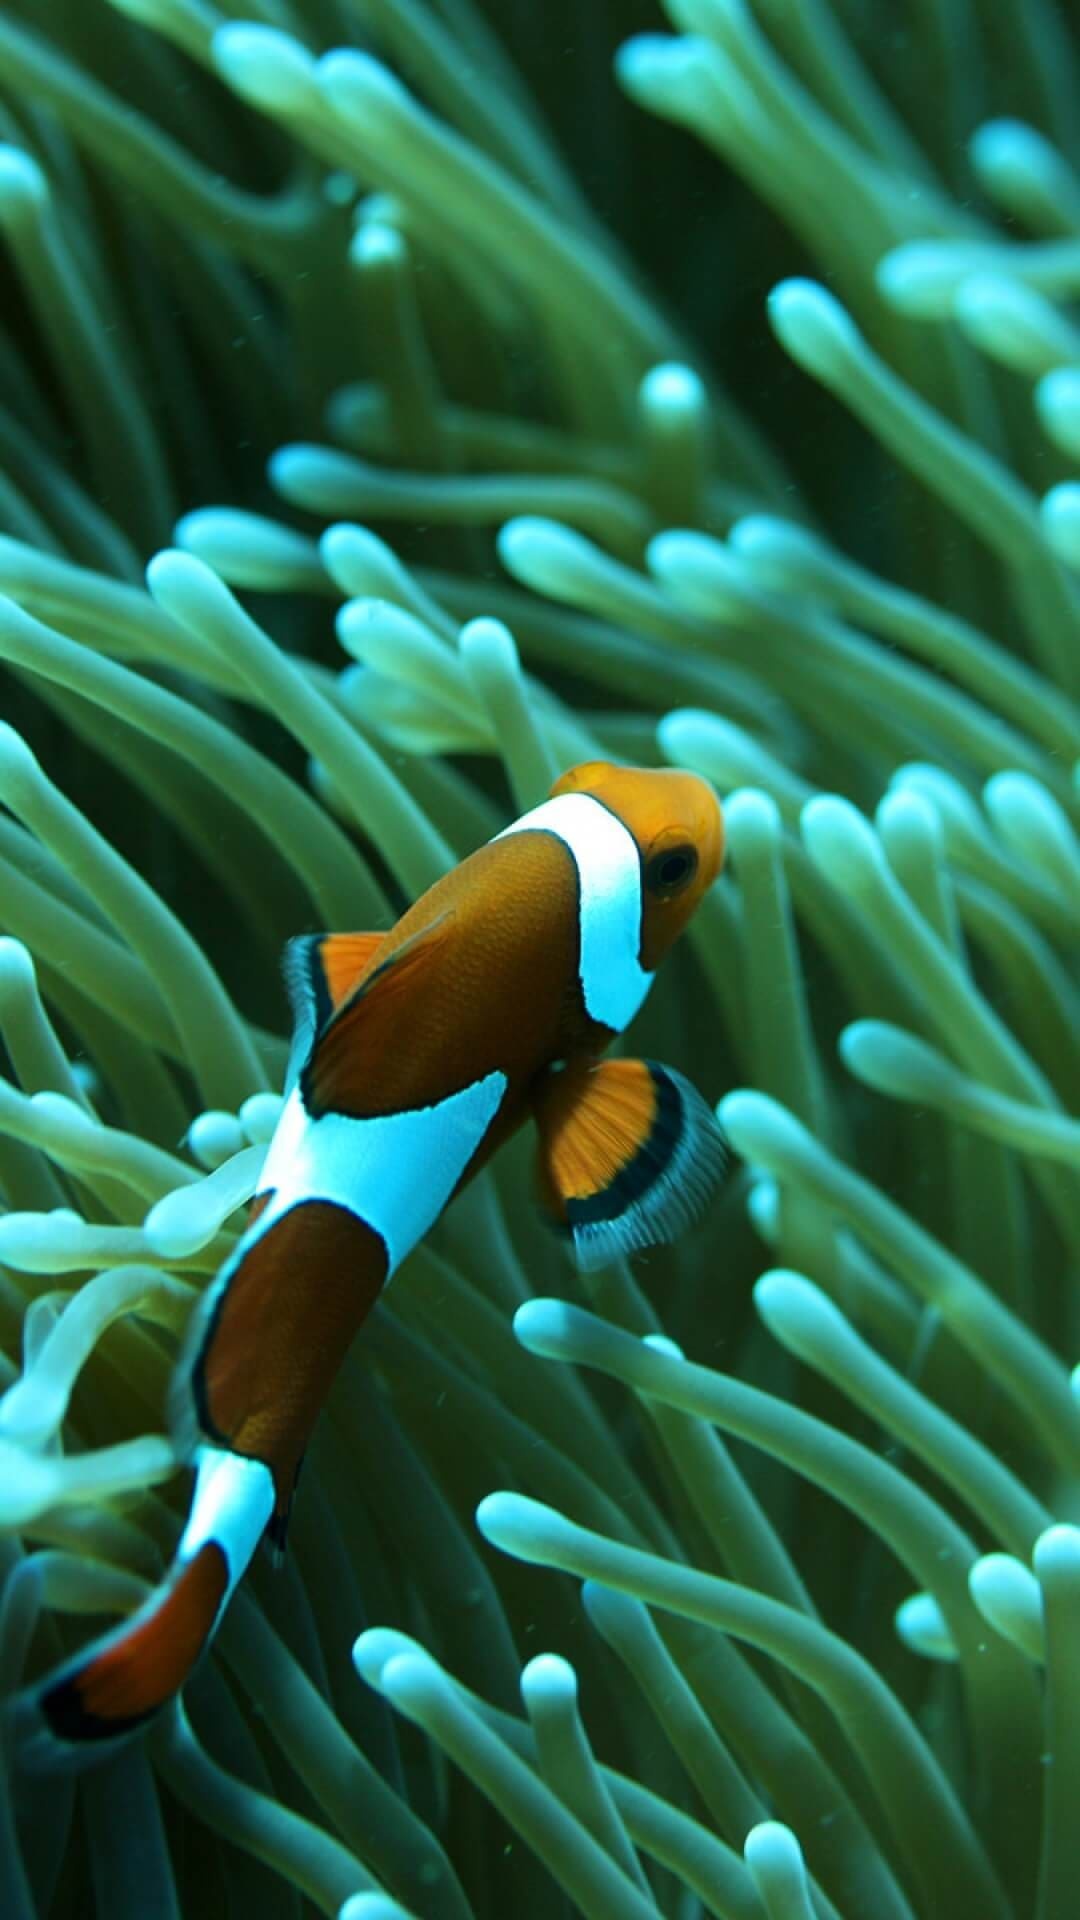 Clown Fish: Share a symbiotic relationship with Sea anemones, Marine organism. 1080x1920 Full HD Wallpaper.